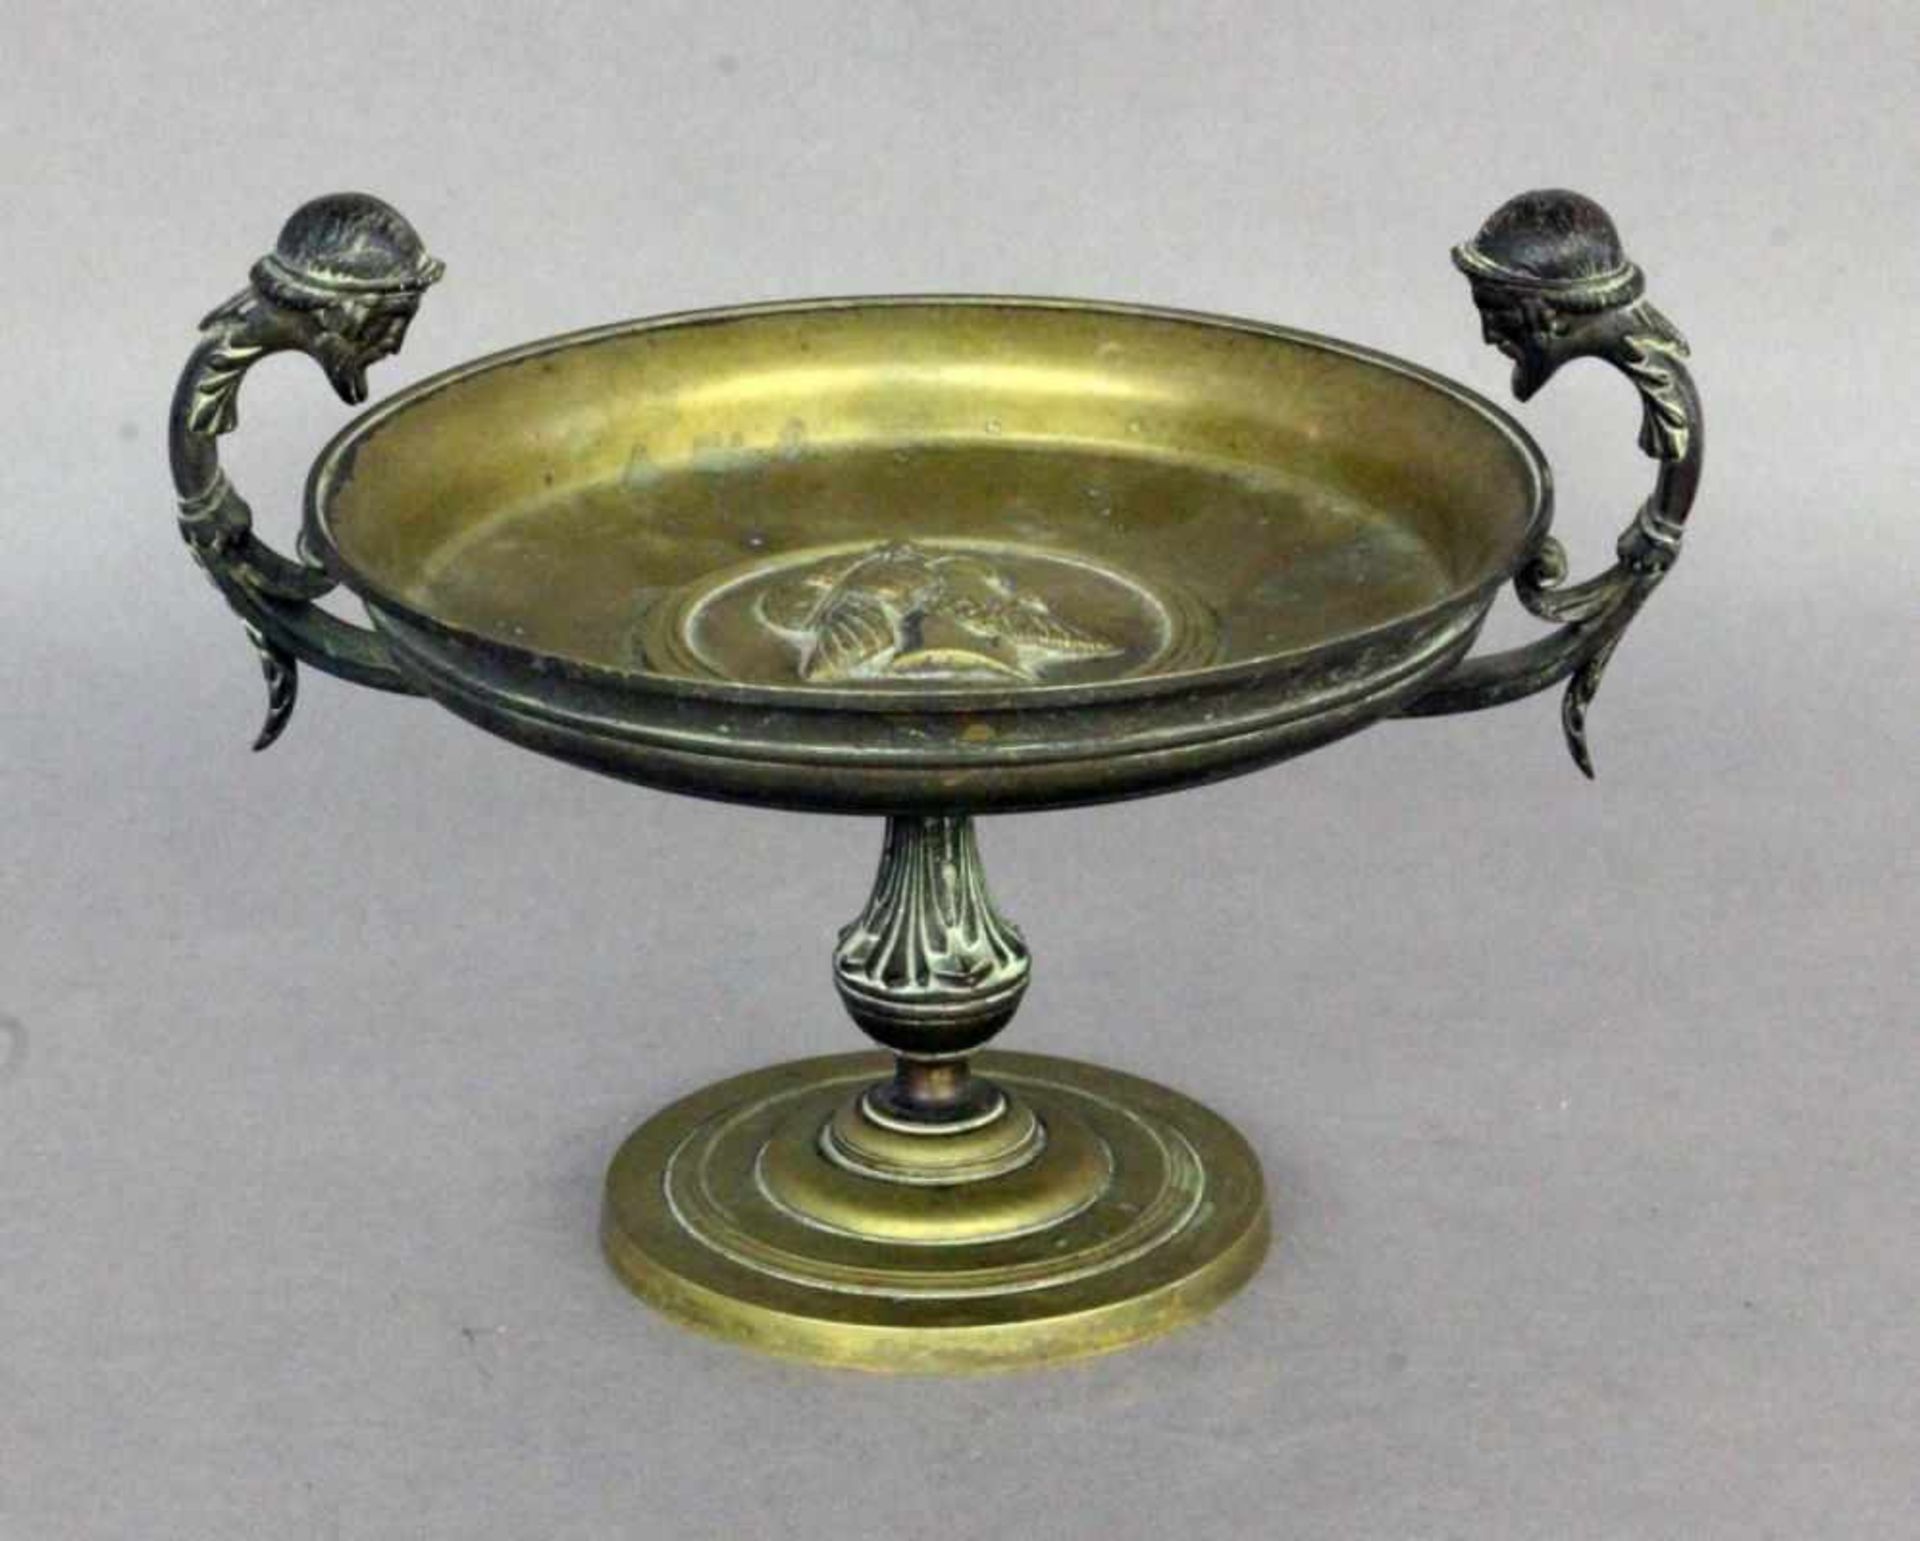 A CENTREPIECE 19th century Bronze bowl in antique style with decorative handles in theshape of